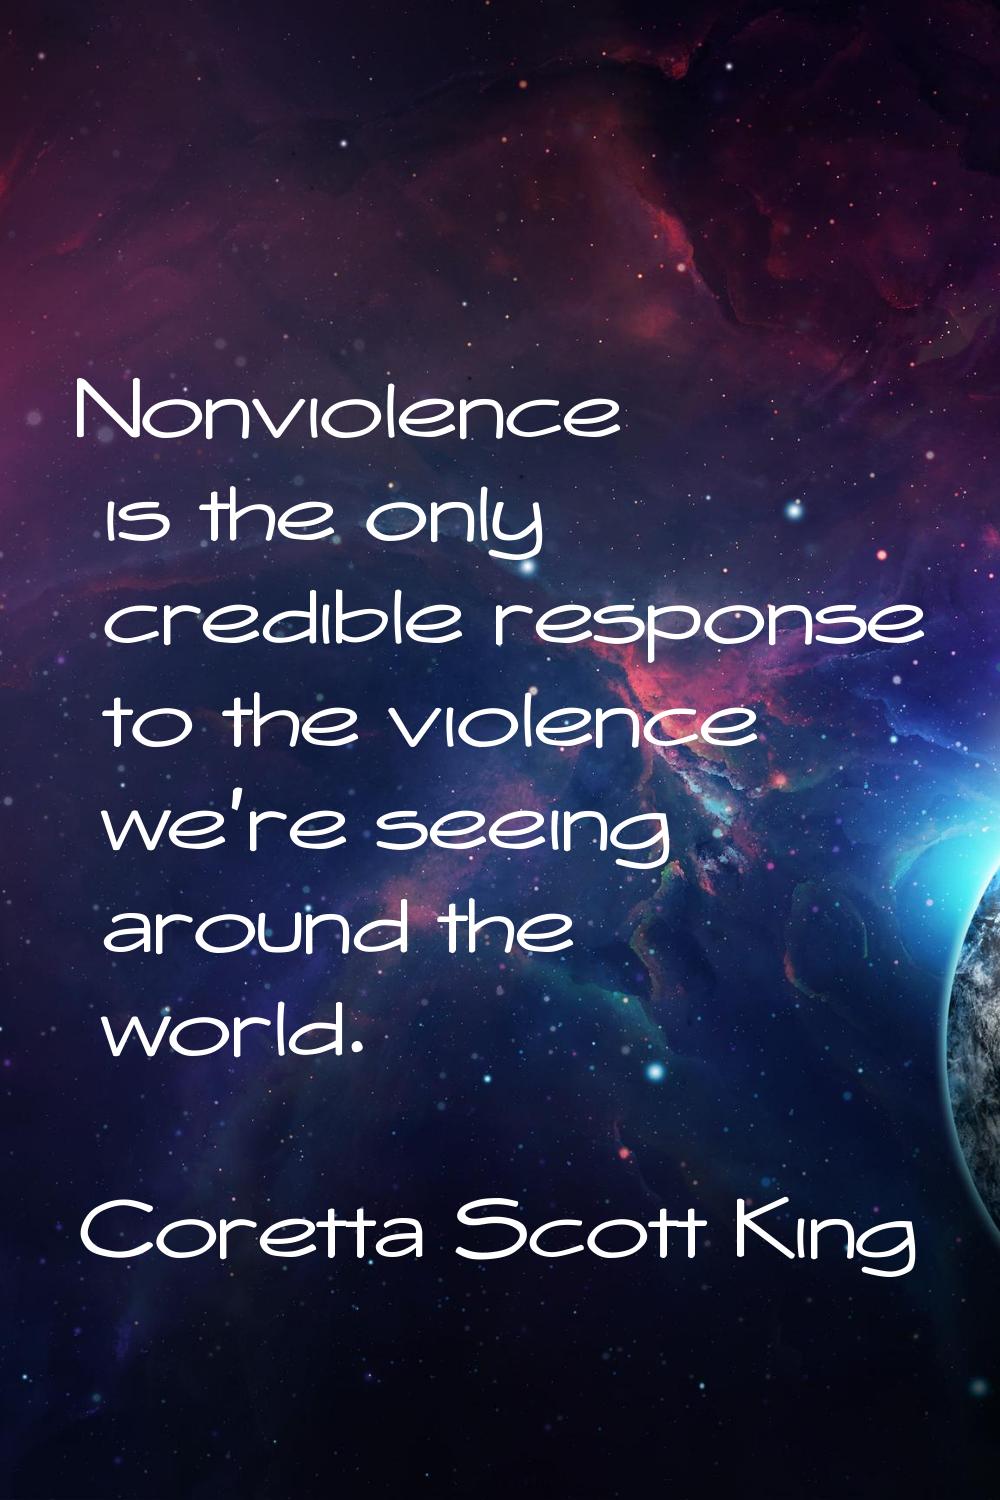 Nonviolence is the only credible response to the violence we're seeing around the world.